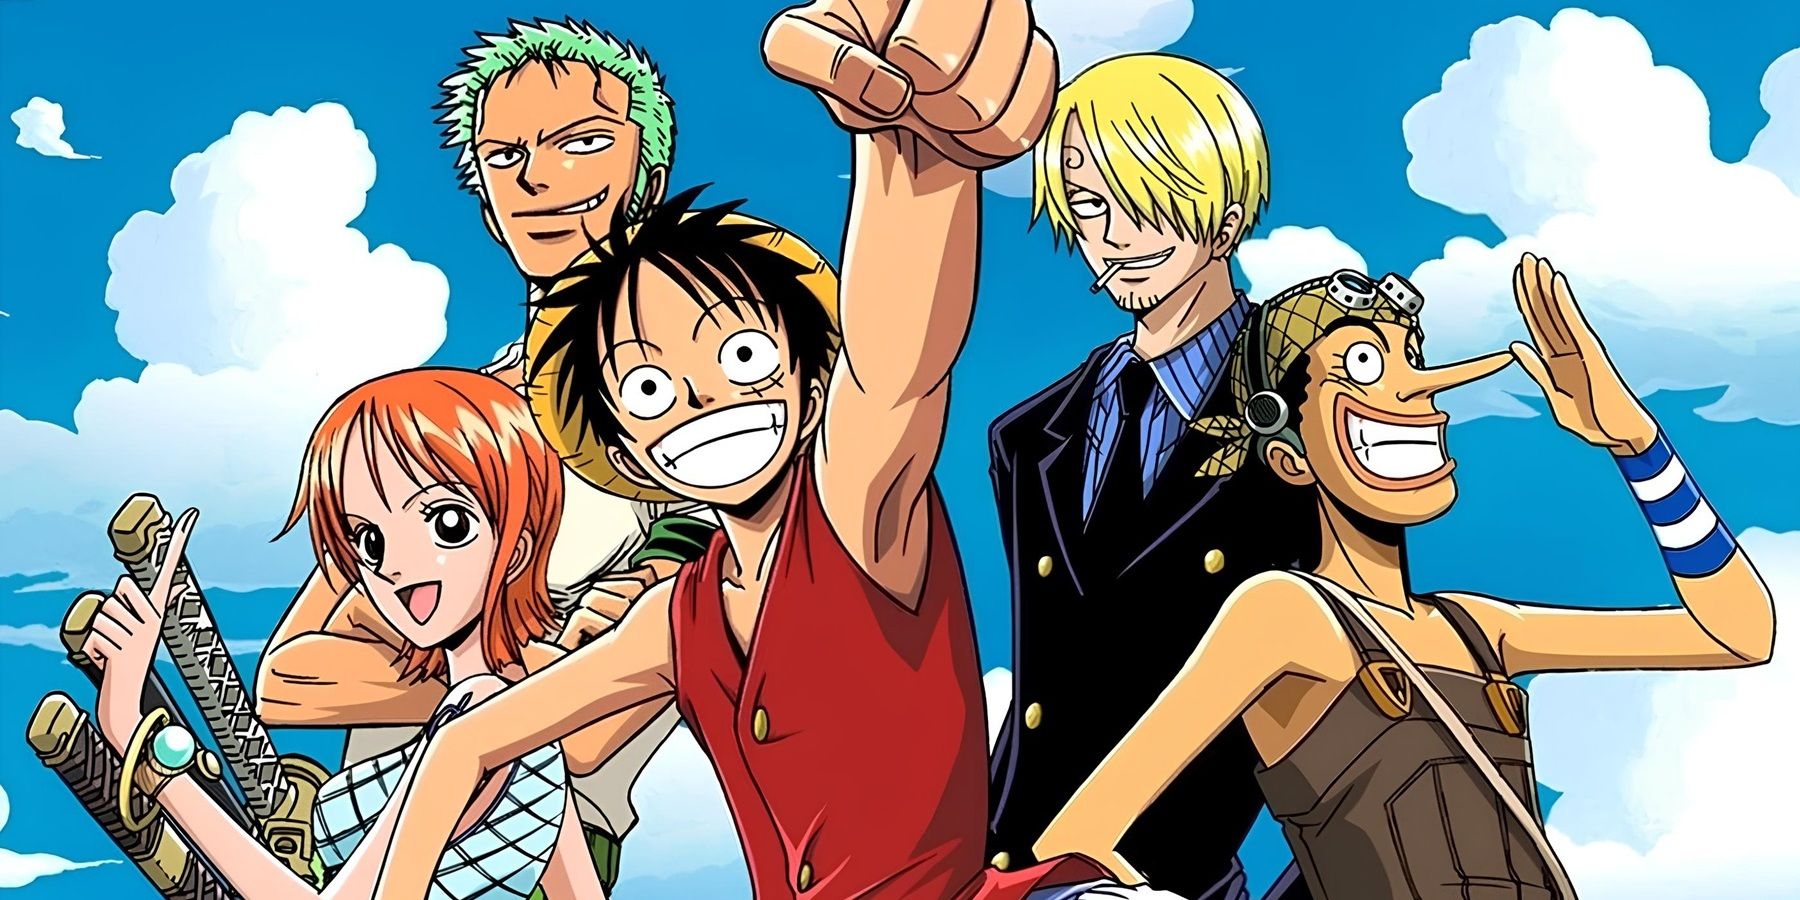 major one piece game coming to the nintendo switch with new content